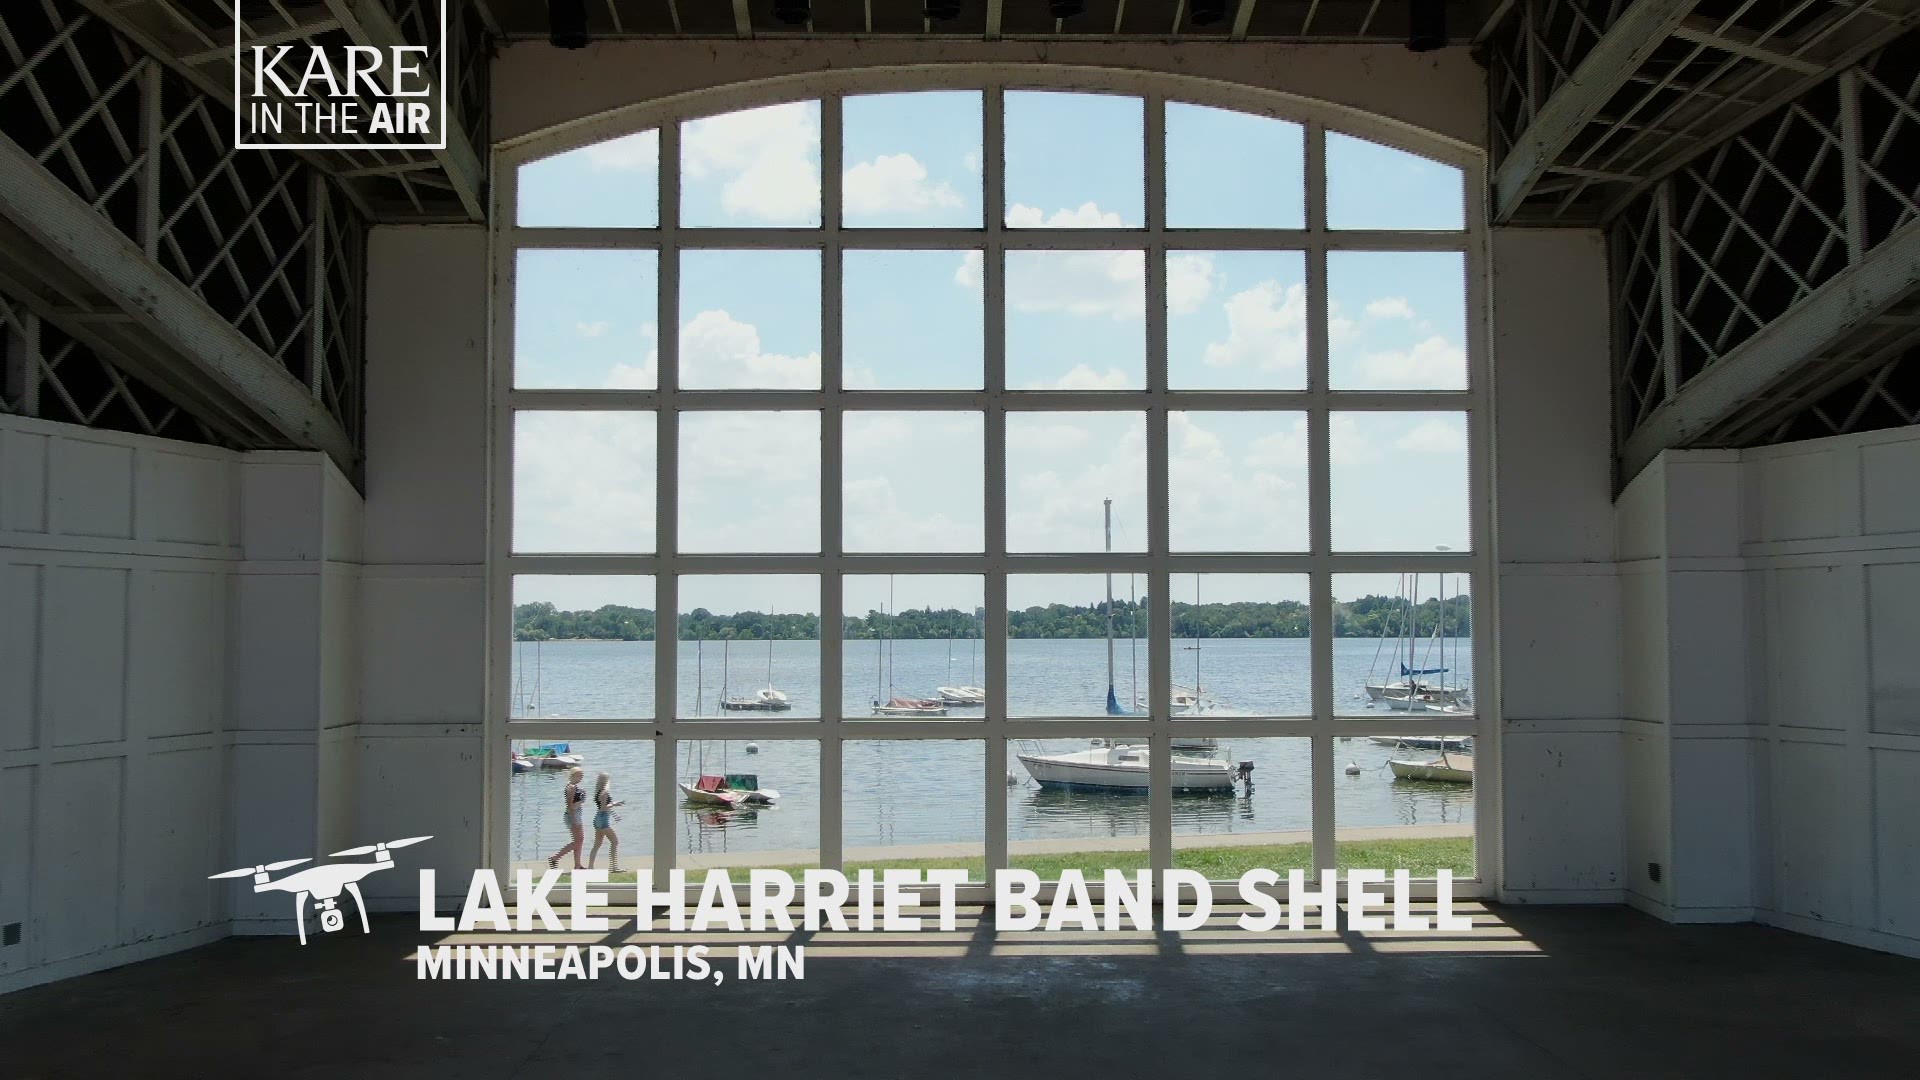 In the latest installment of KARE in the Air we fly our drone over the Lake Harriet Bandshell, a cultural icon that endured a serious run of bad luck.